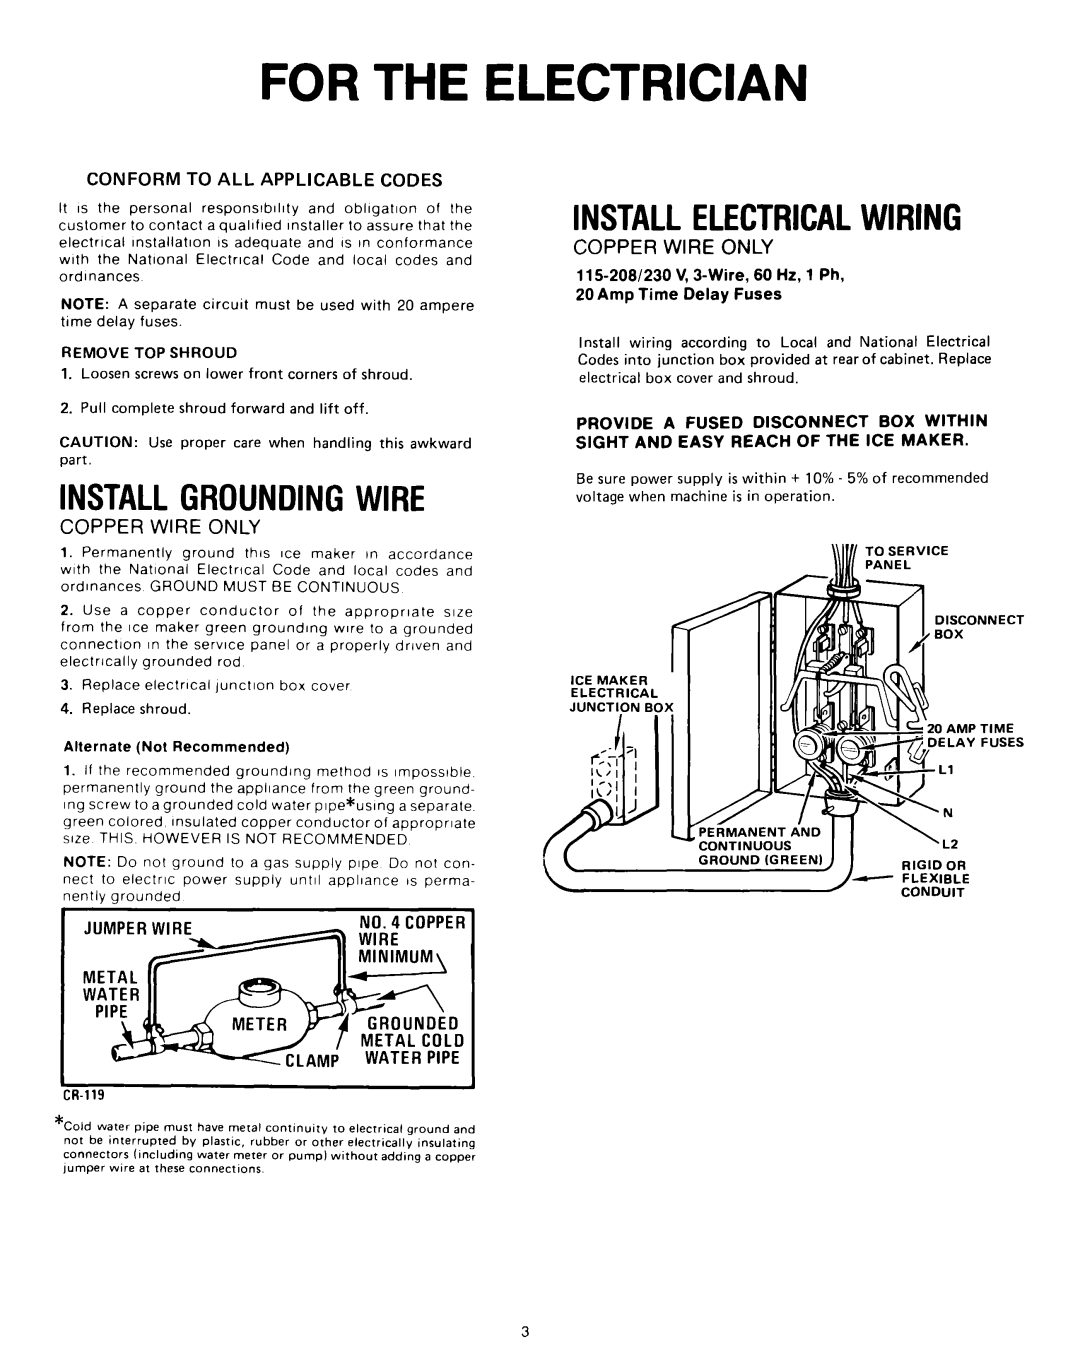 Whirlpool CHCH8WE, CHCH8AE, CHCH8WS For The Electrician, Installgroundingwire, Installelectricalwiring, Copper Wire Only 